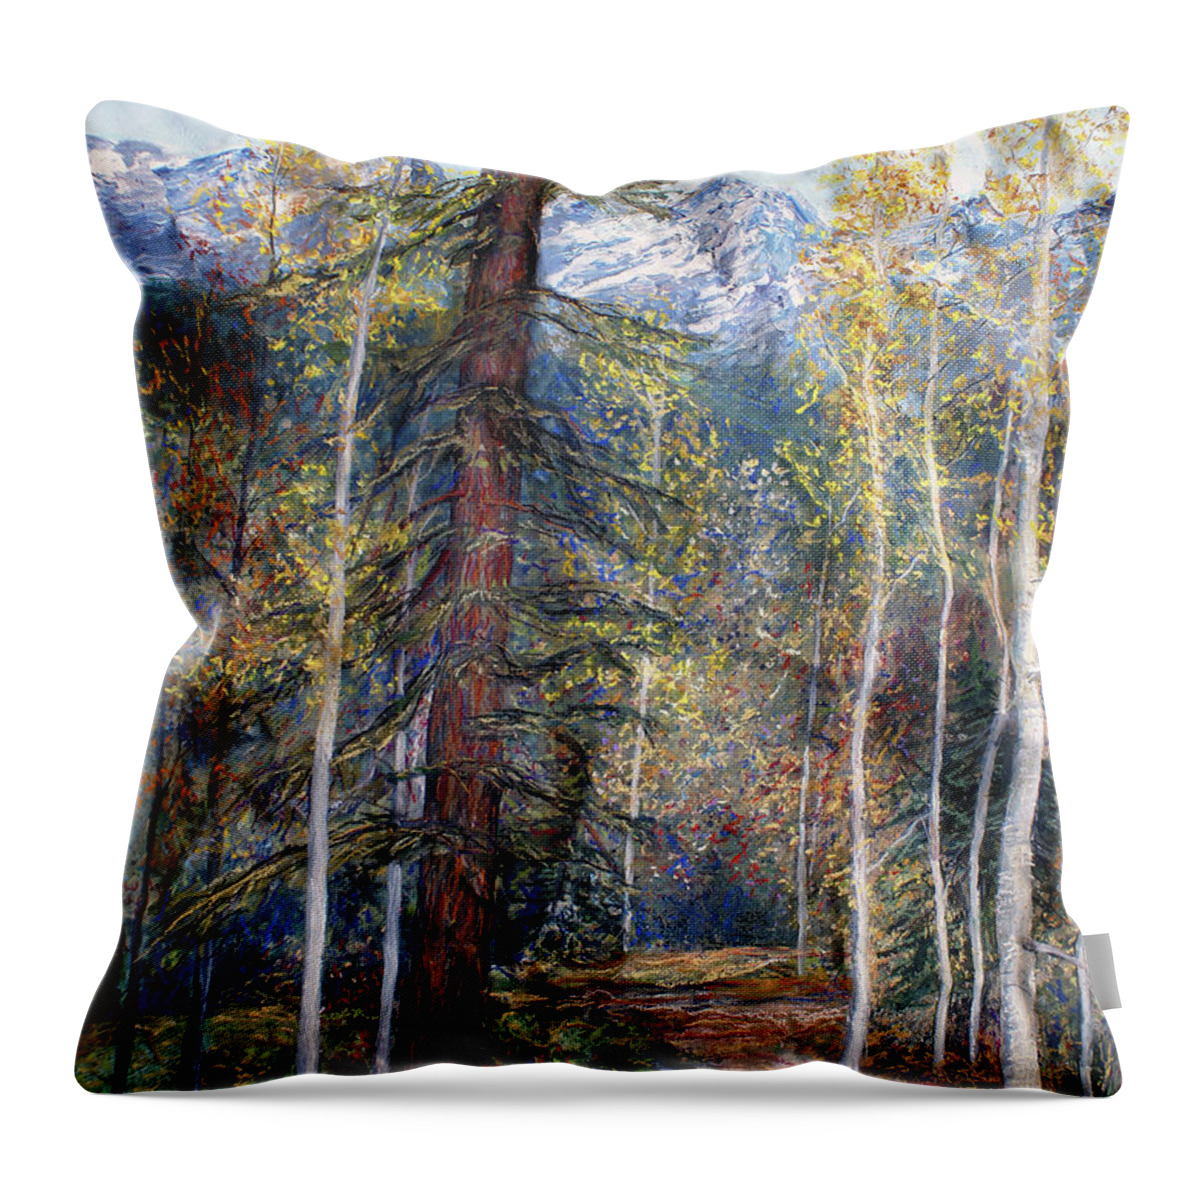 Mixed Media Throw Pillow featuring the photograph Colorado High In Fall by Linda Goodman